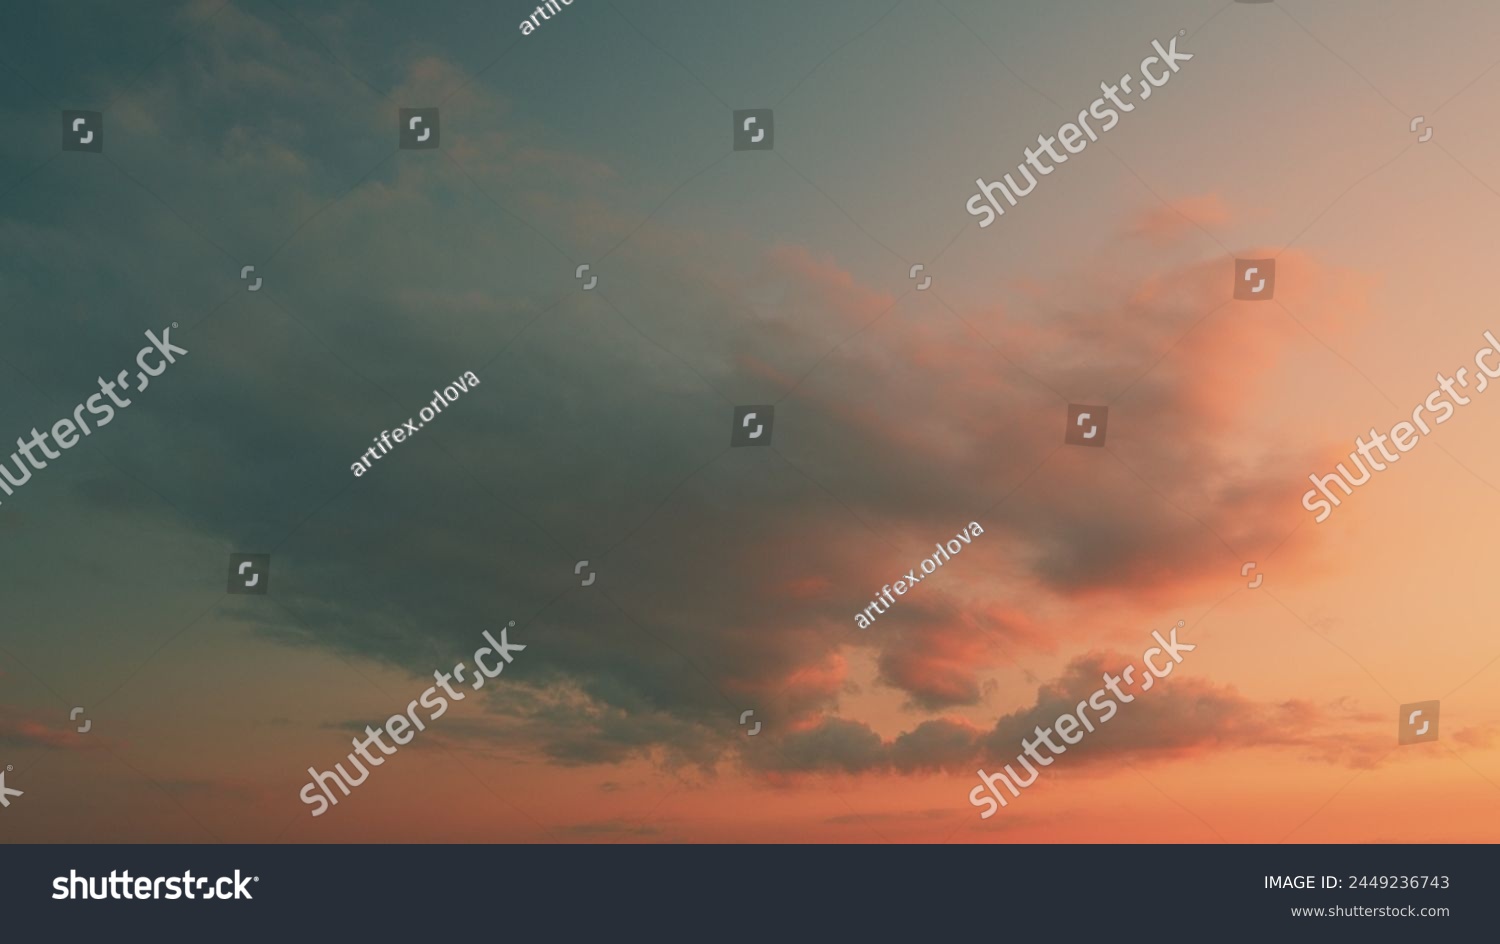 Sunset Blue Sky With Pink Clouds. Summer Paradise Dreamy Concept. Graphic Resources. #2449236743